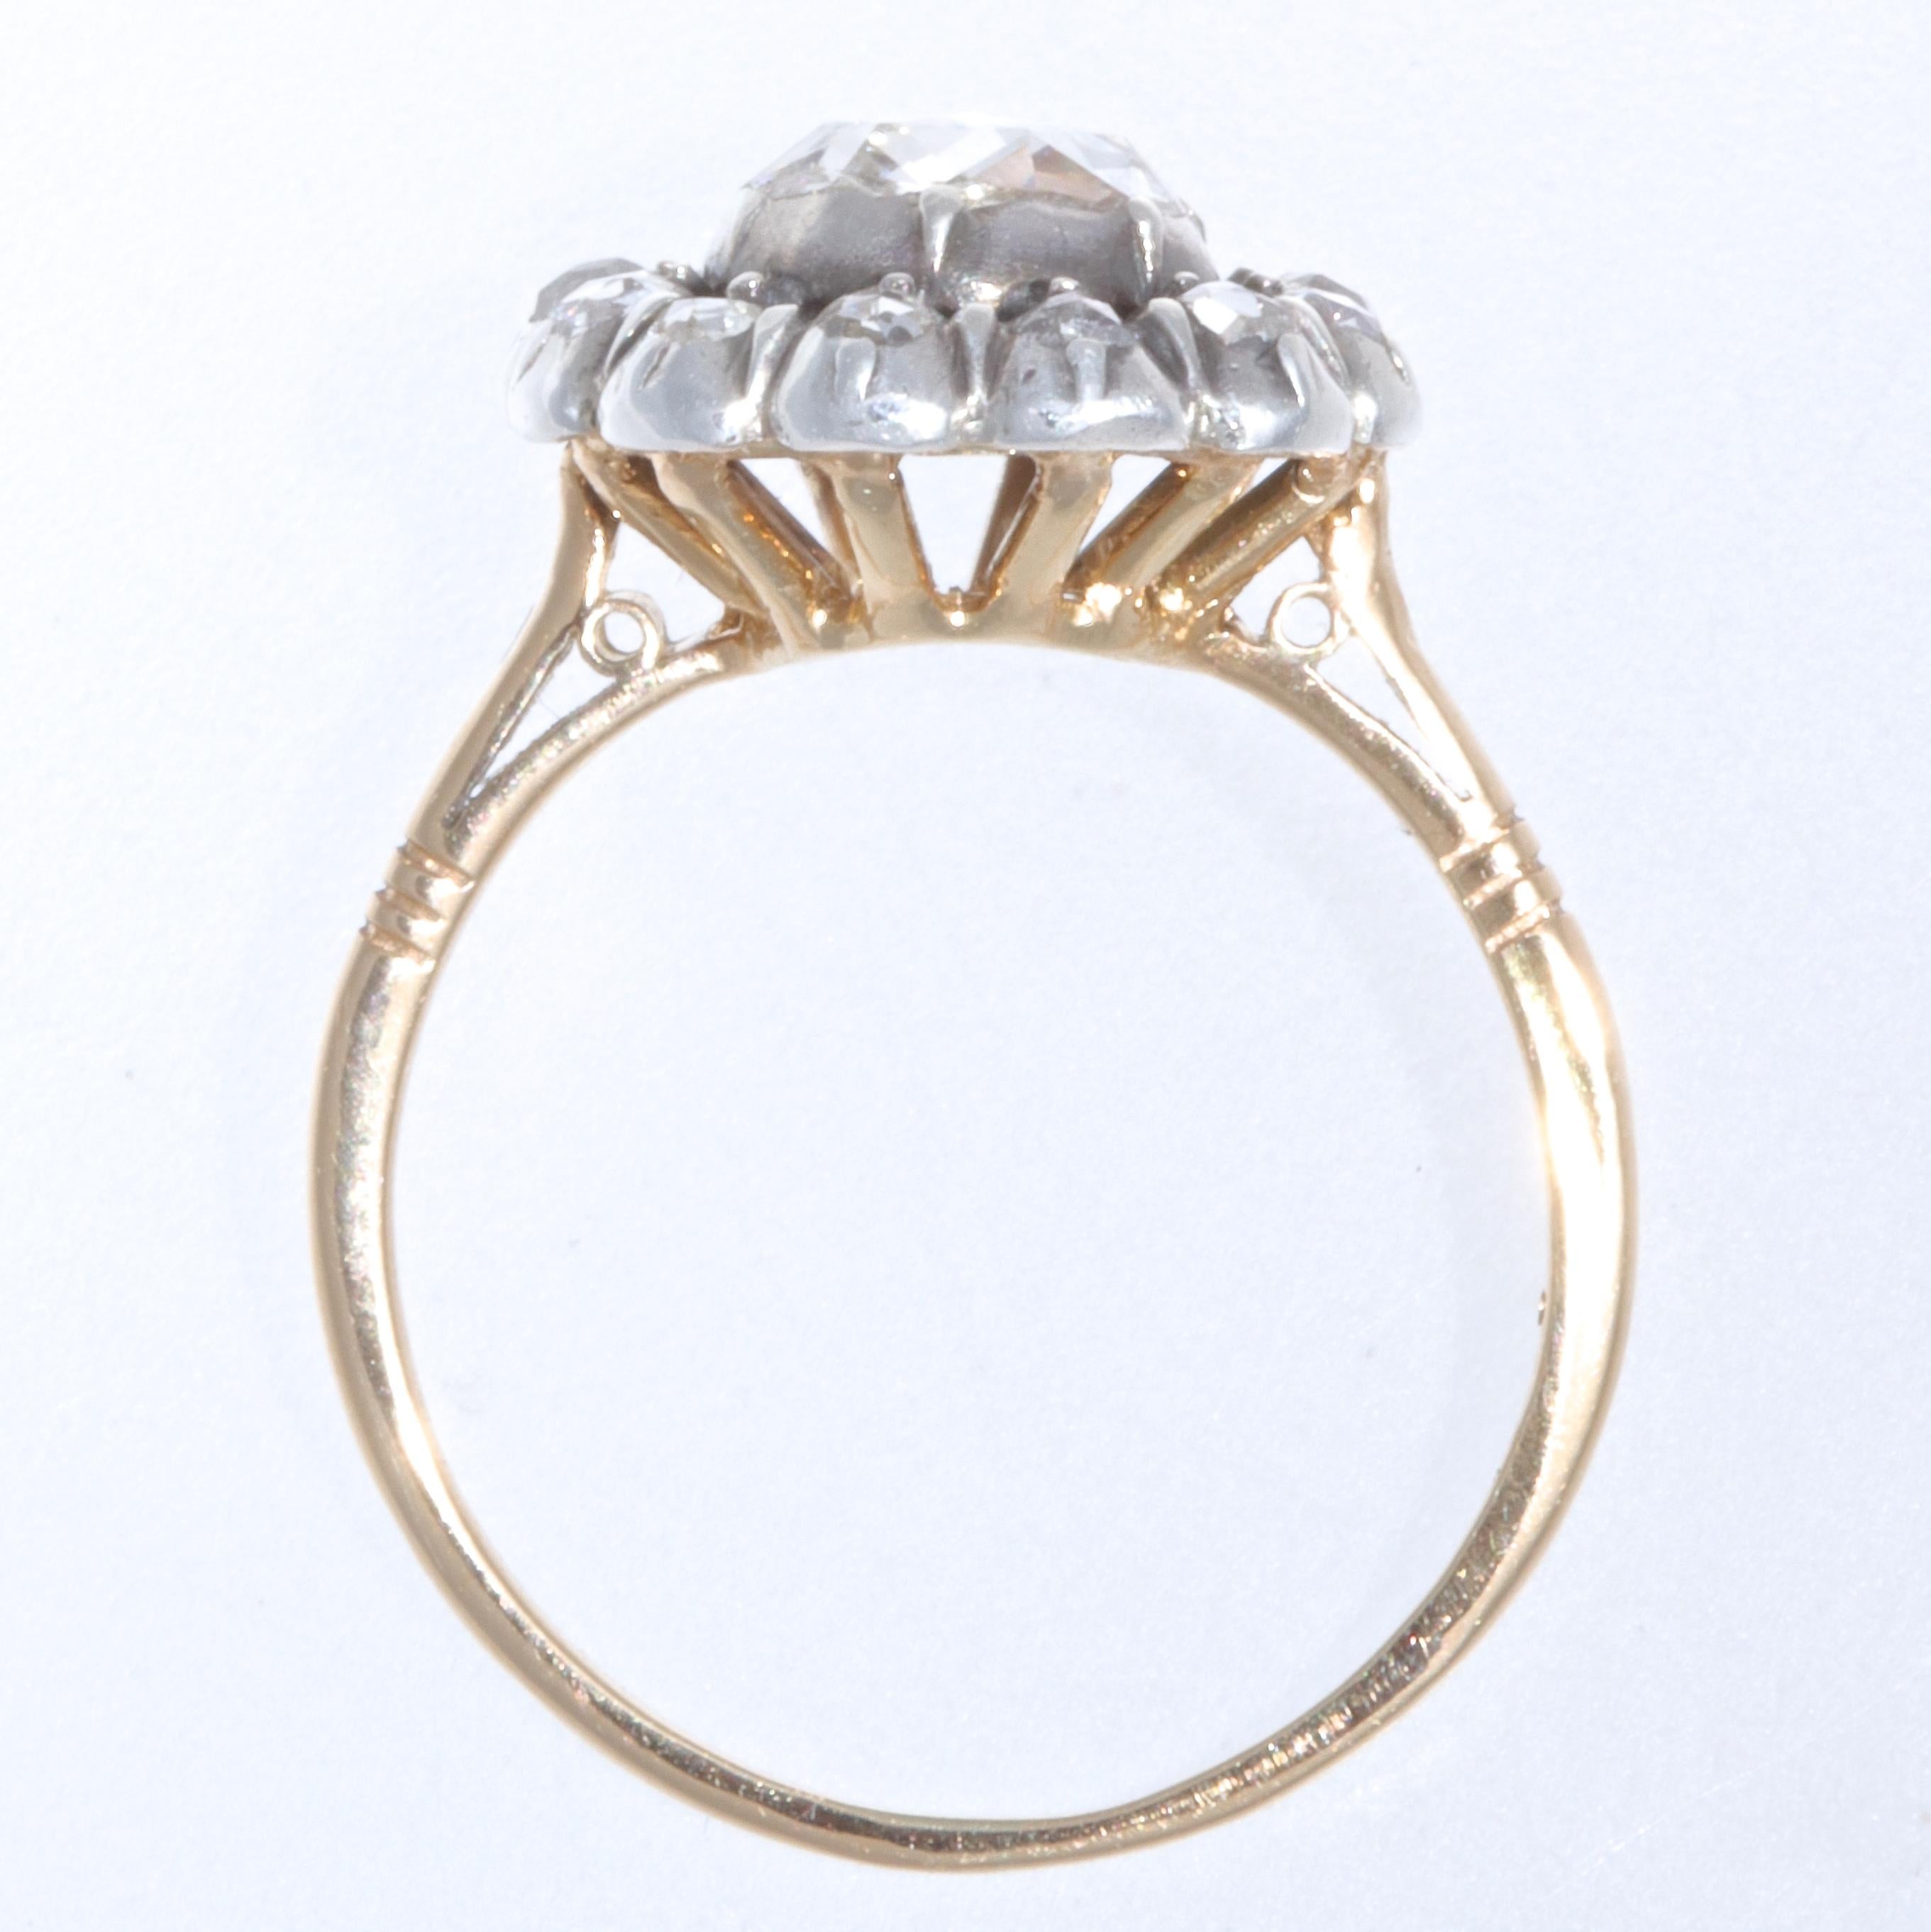 The cluster ring is from the late Georgian era. The cluster is original, the ring shank was added later. Featuring a rose cut diamond approximately 0.90 carats, G-H color SI2 clarity. The stone is in a foiled, closed back, silver collet bezel